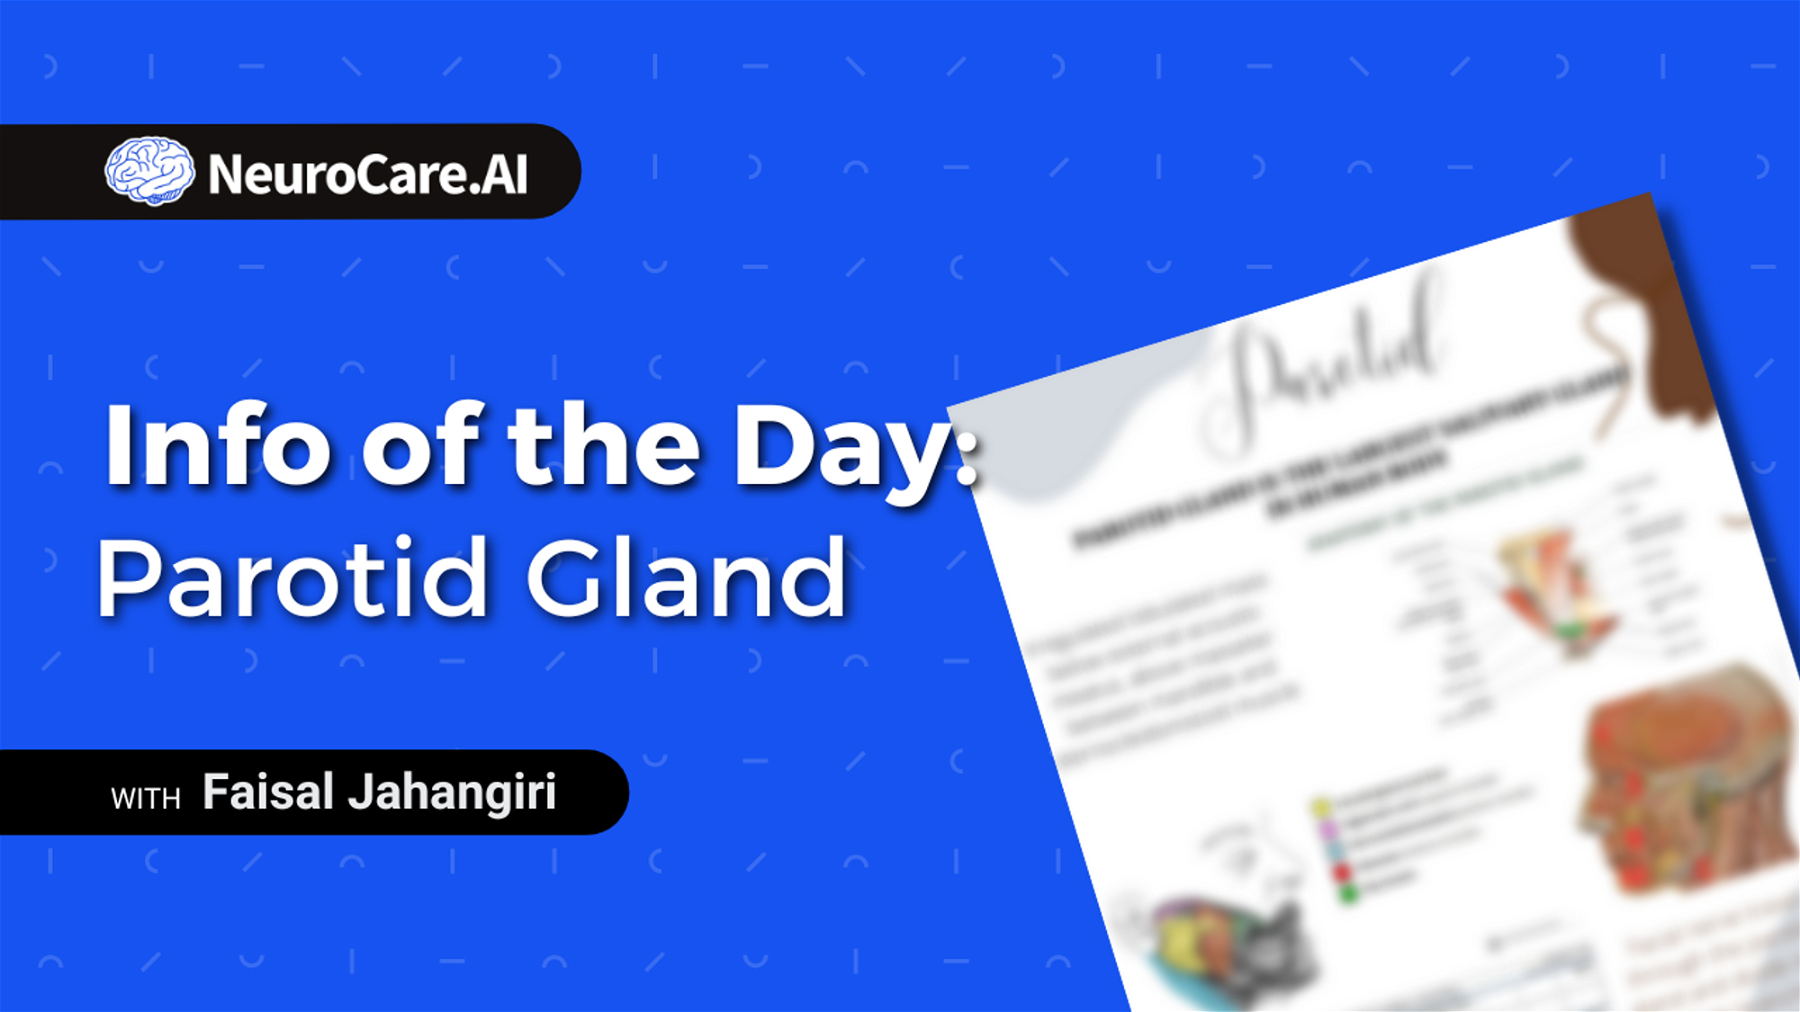 Info of the Day: "Parotid Gland"